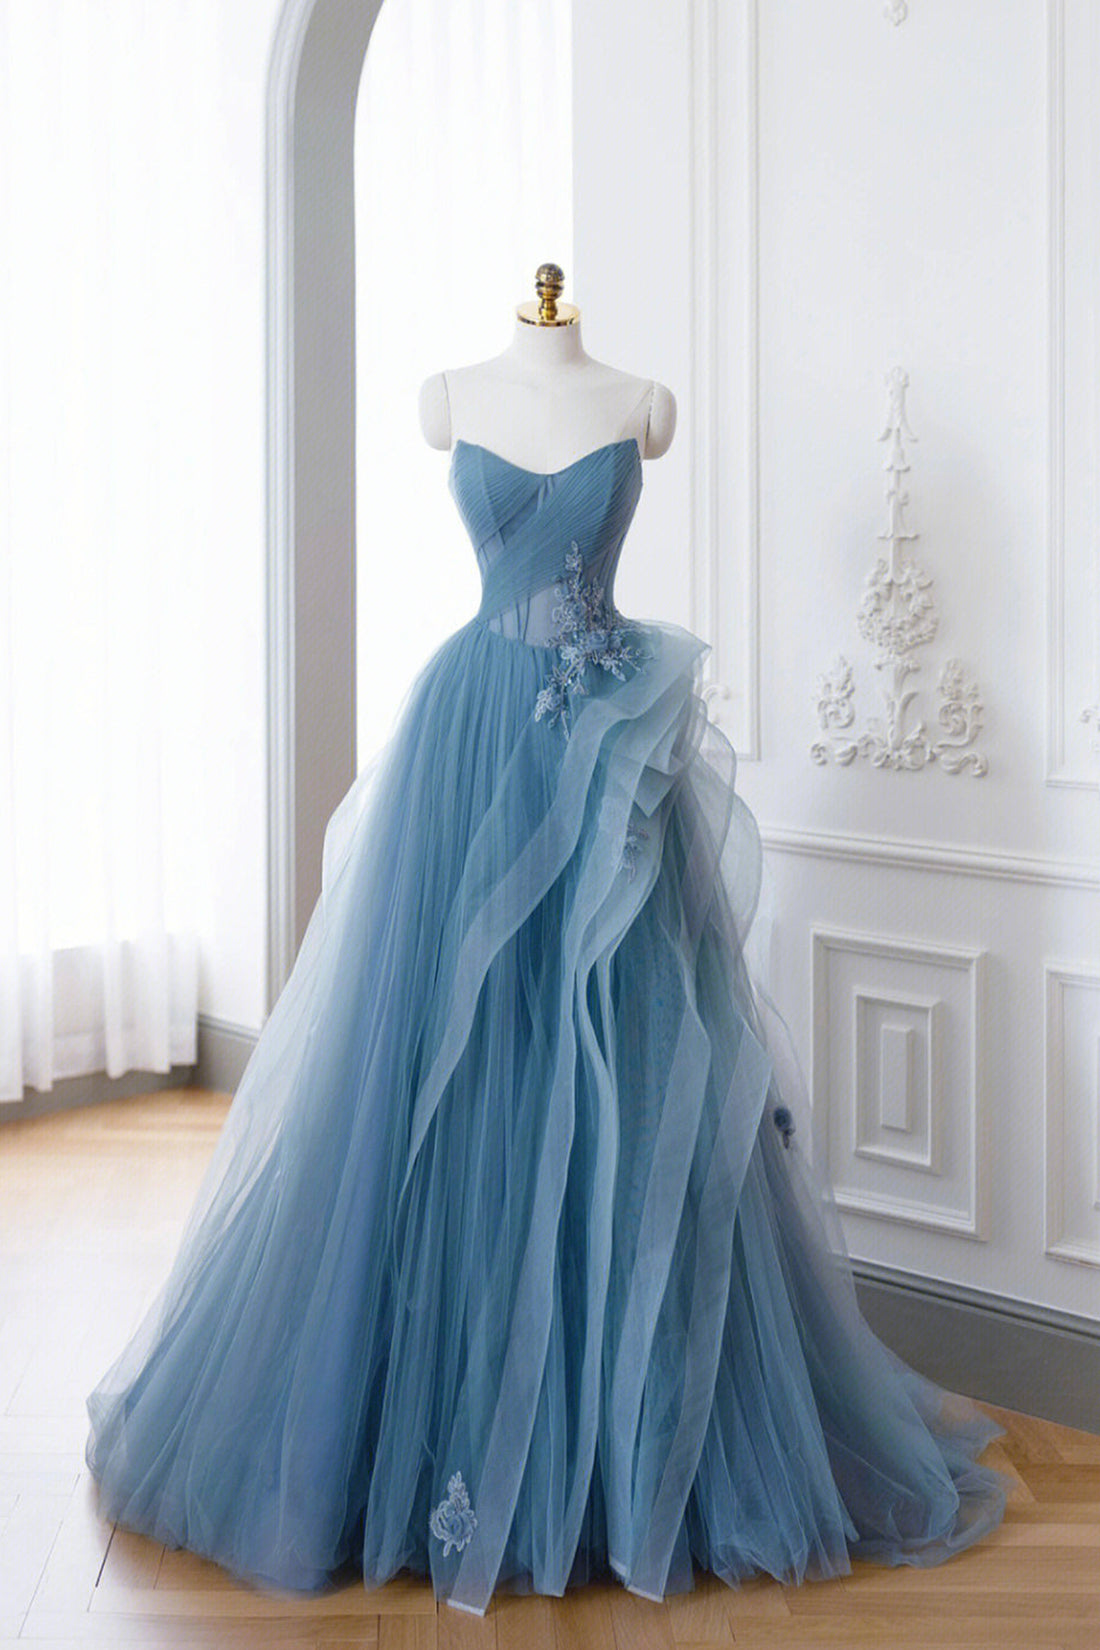 Dusty Blue Tulle Floor Length Prom Dresses, Blue Off the Shoulder Removable Sleeve Evening Dress